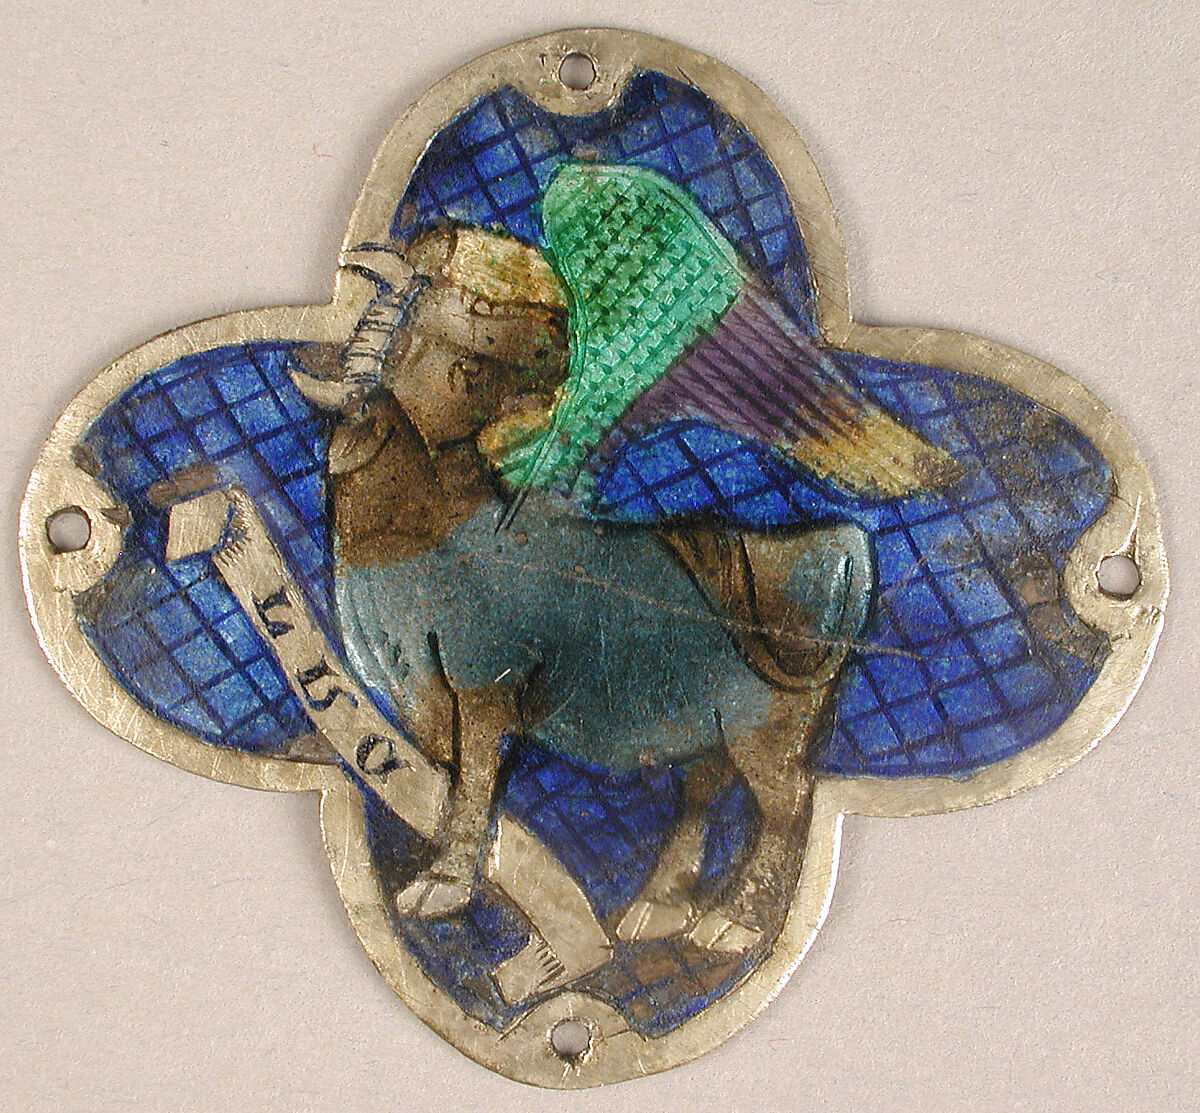 Plaque with the Ox of Saint Luke, Basse taille enamel, silver, Catalan 